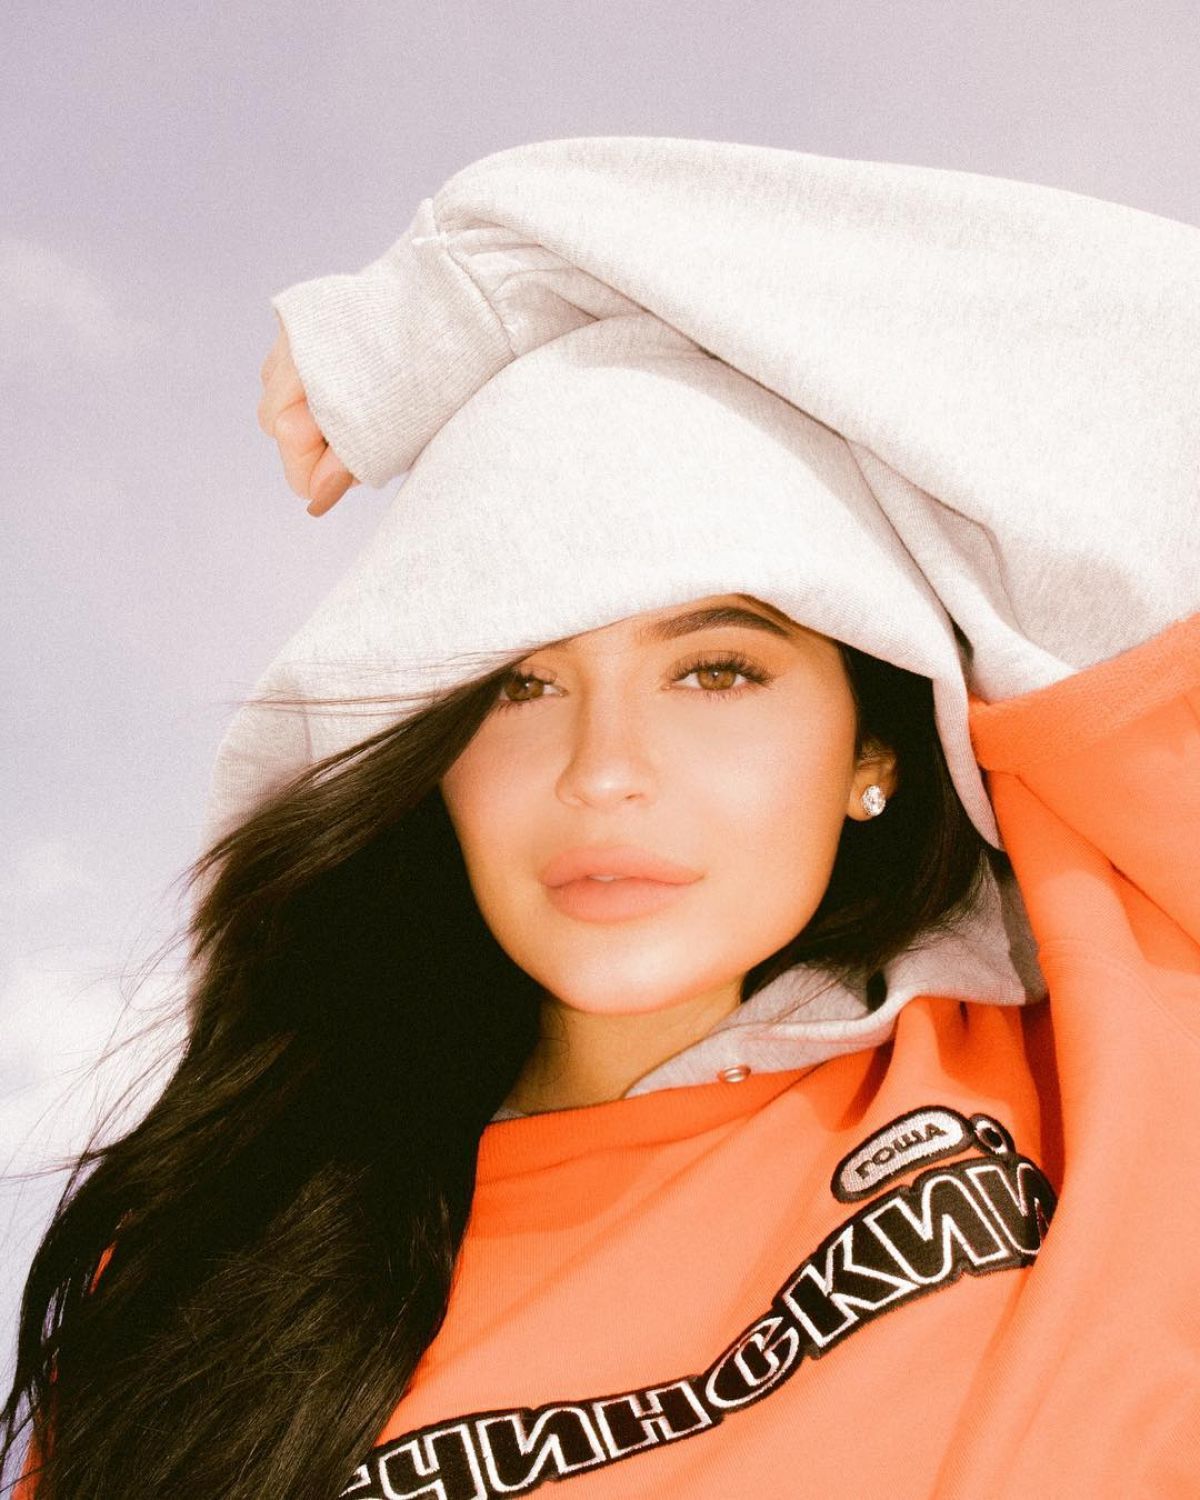 KYLIE JENNER and JORDYN WOODS in Wyoming, March 2018 Instagram Pictures ...